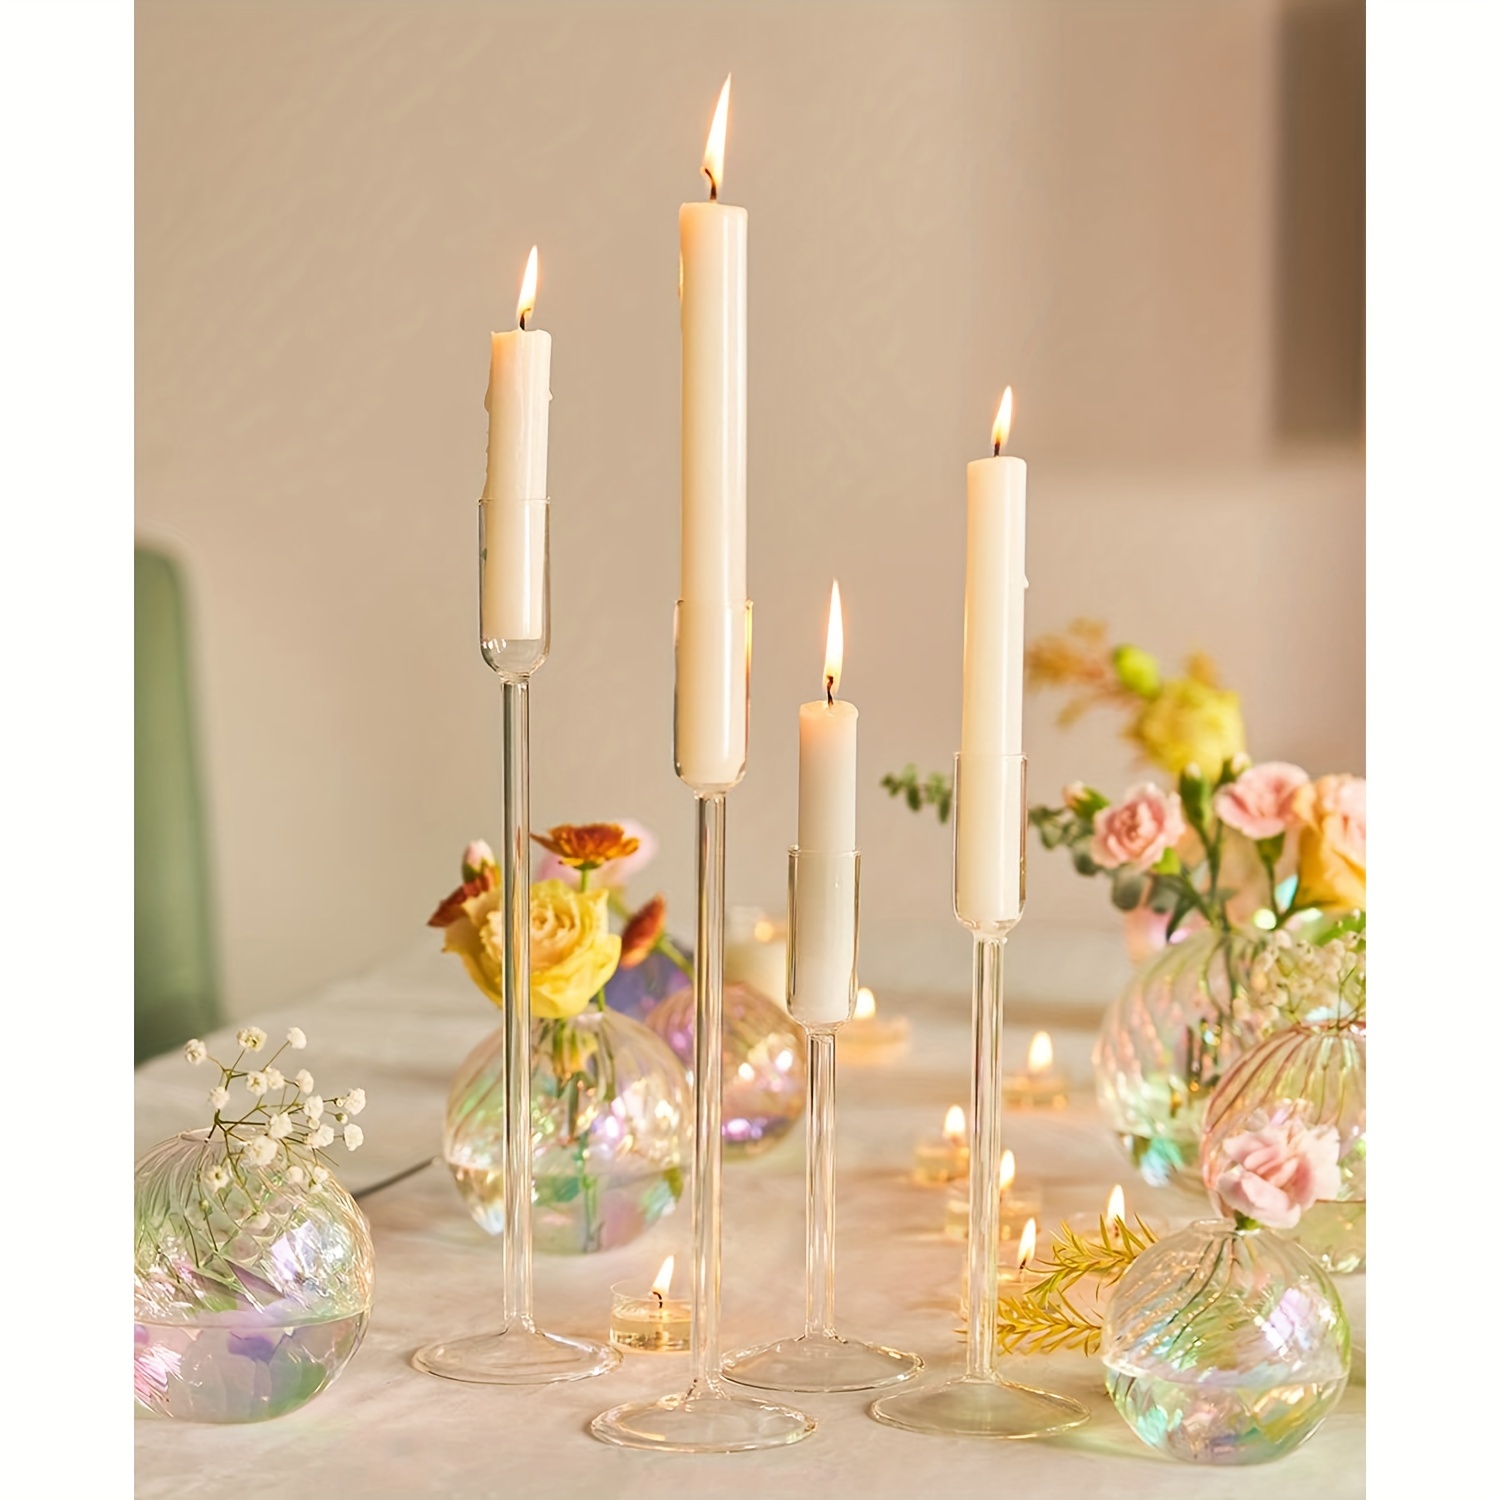 4pcs Candlestick Holders Glass For Taper,Decorative Candle Sticks Candle  Holder For Christmas Events Party Wedding Reception Table Centerpiece  Decorat